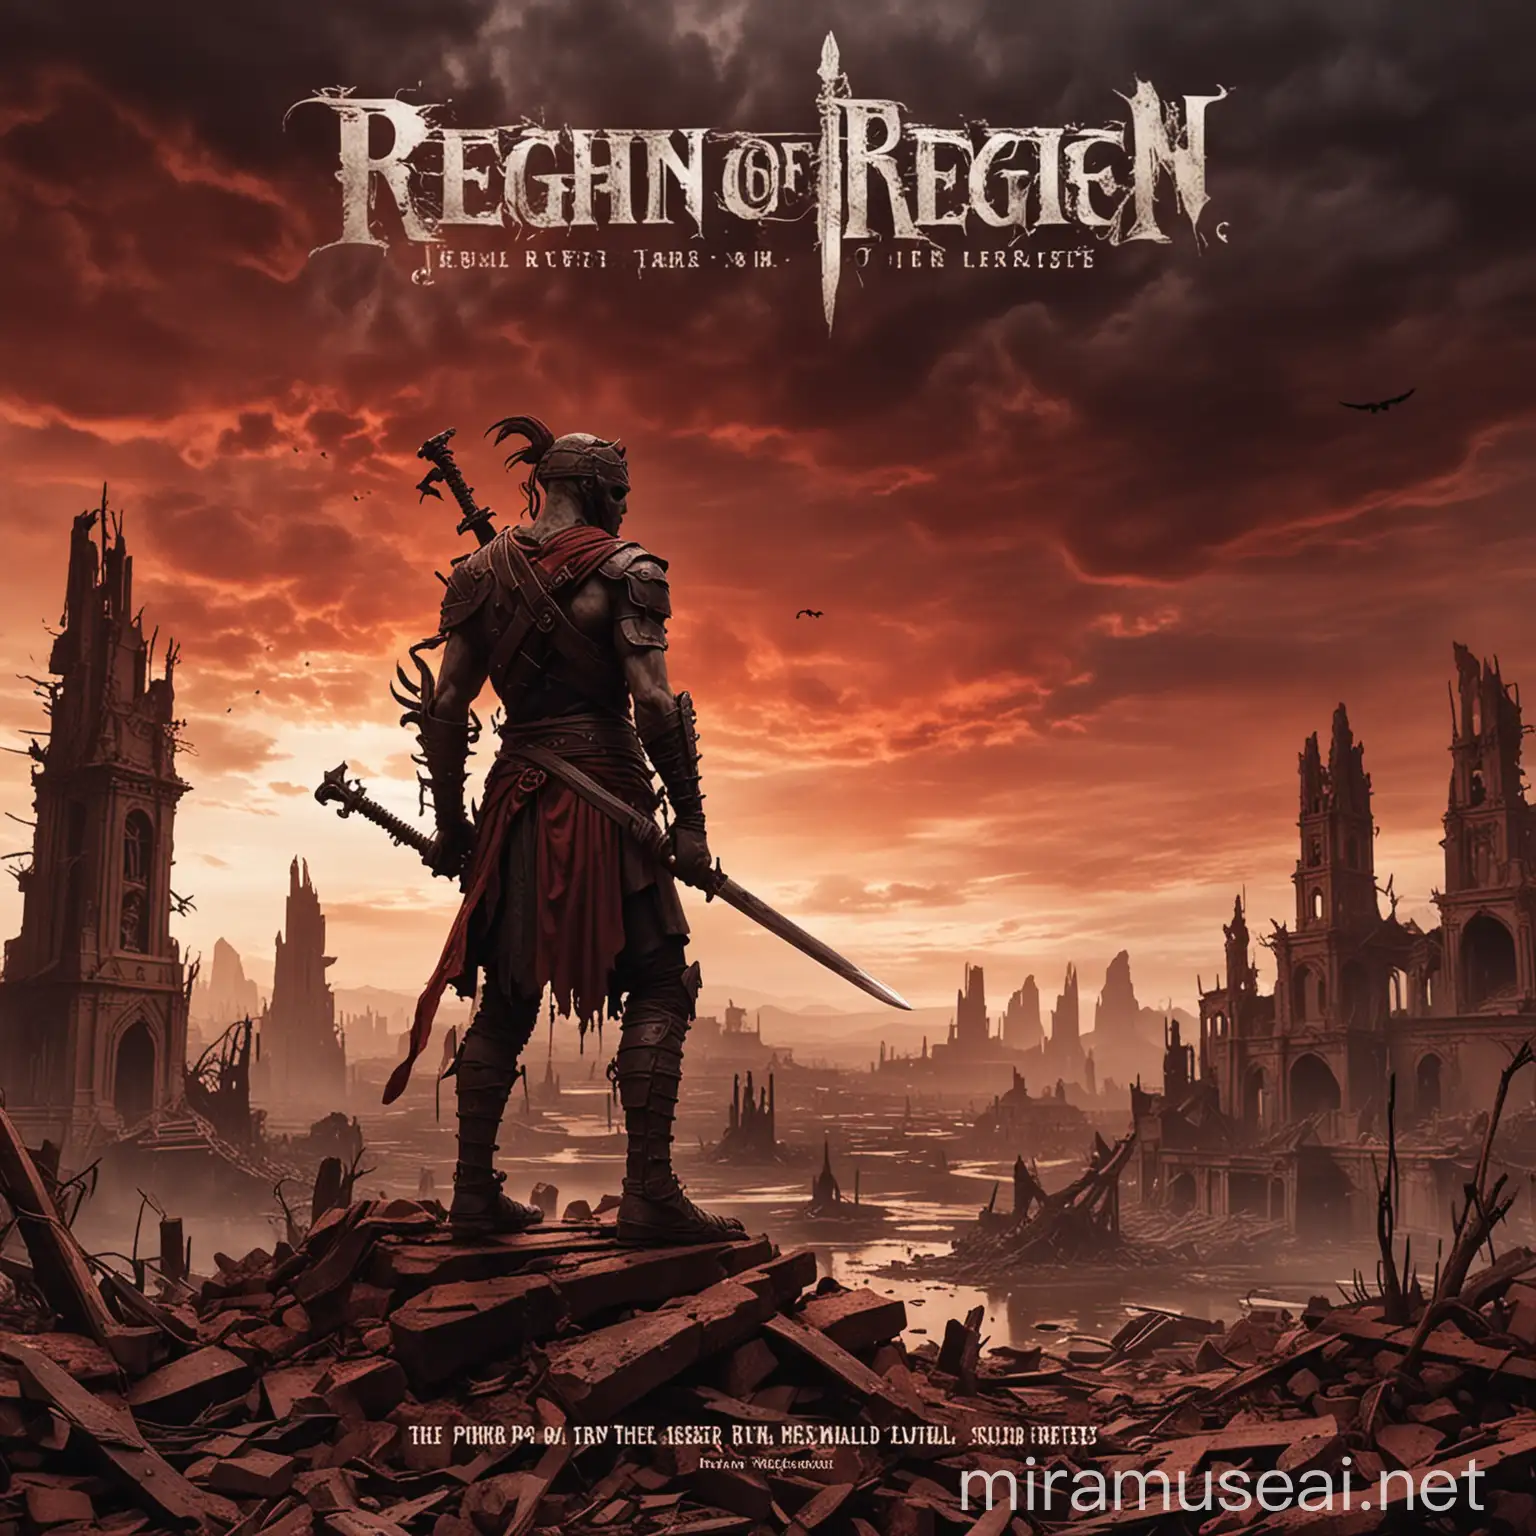 The cover features a desolate, post-apocalyptic cityscape under a blood-red sky. In the foreground, a crumbling statue of a warrior stands with a broken sword, symbolizing the fall of civilization. Dark clouds swirl ominously above, and the faint silhouettes of skeletal trees can be seen in the background. The band's logo, jagged and metallic, sits at the top of the cover, with the album title "Reign of Ruin" emblazoned below in bold, distressed letters.